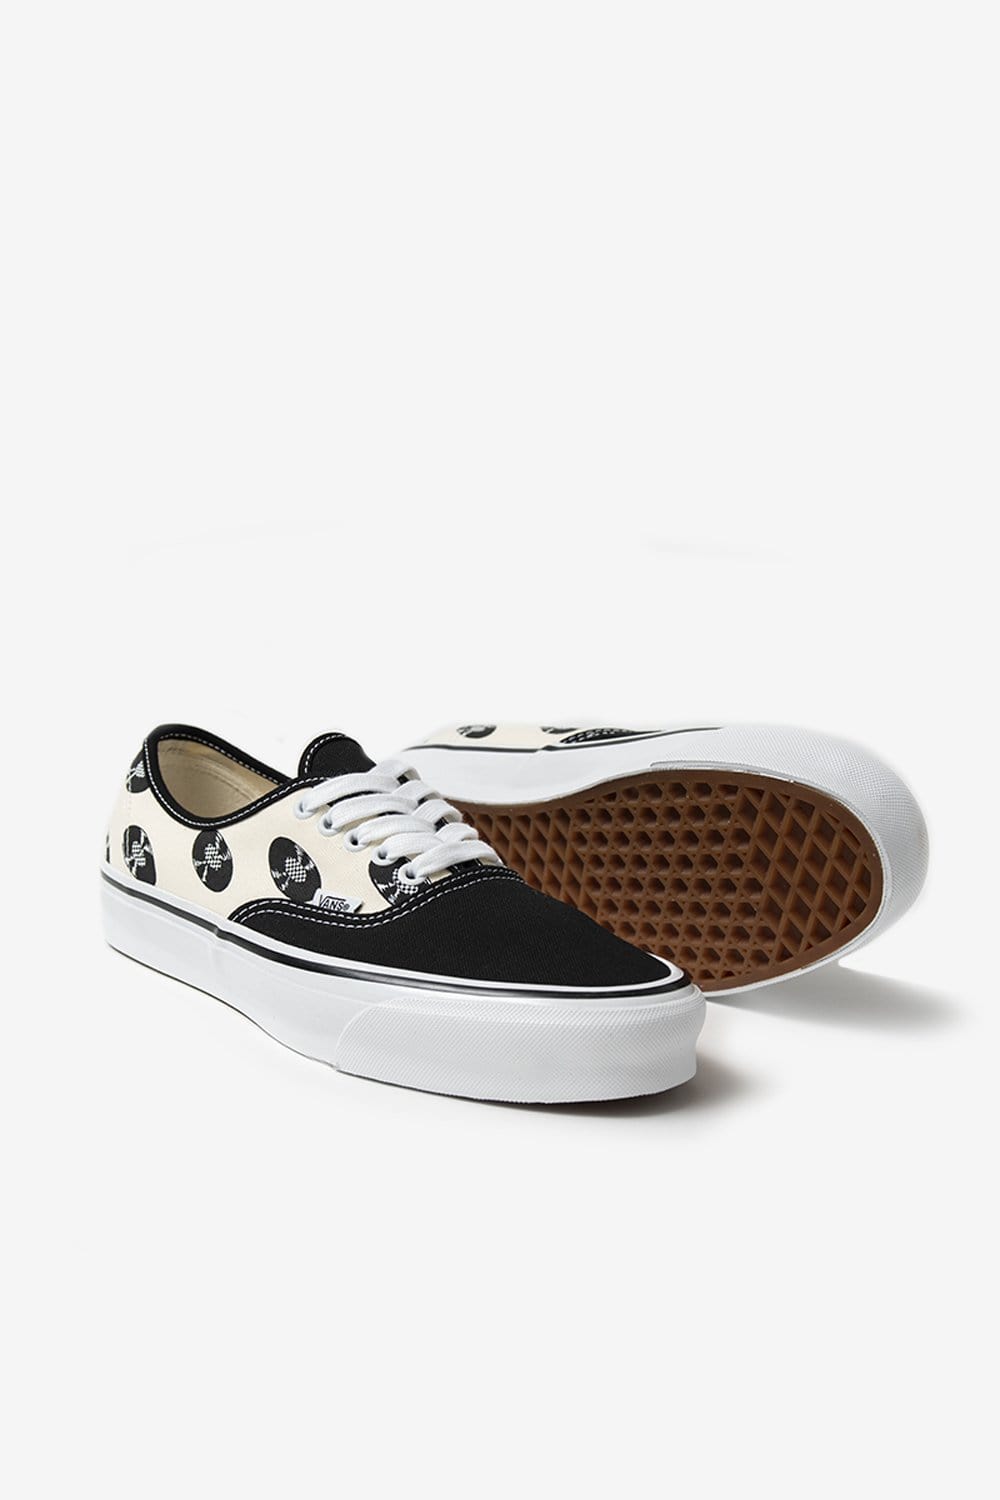 Vault by Vans OG Authentic LX Wacko Maria (Classic White/Records